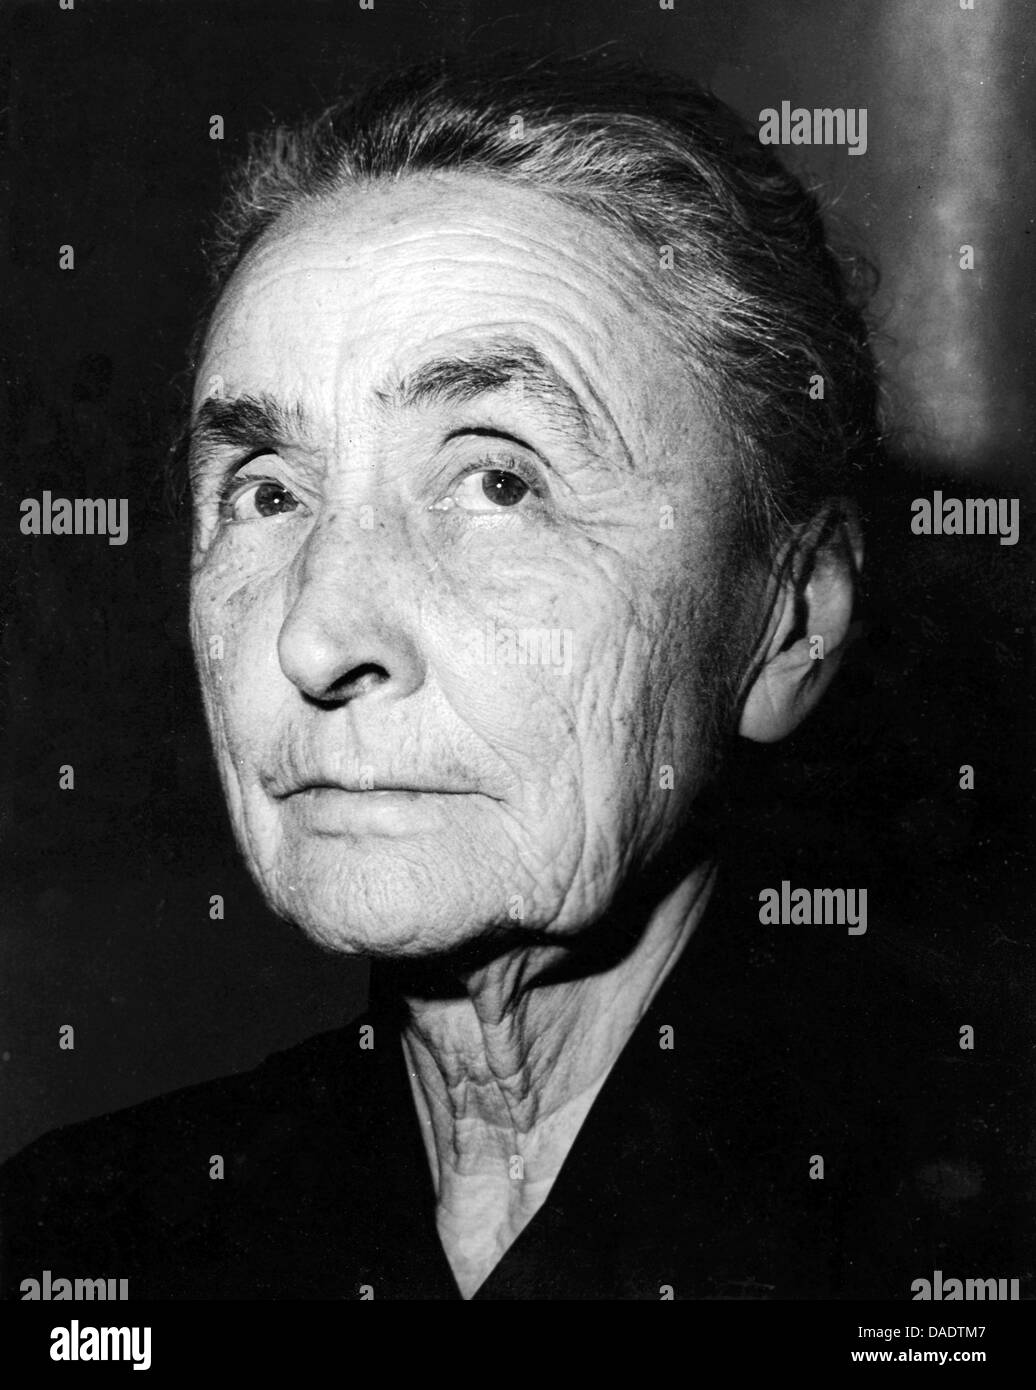 Artist Georgia O'Keeffe in 1962. Portrait by photographer Fred Stein (1909-1967) who emigrated 1933 from Nazi Germany to France and finally to the USA. Stock Photo